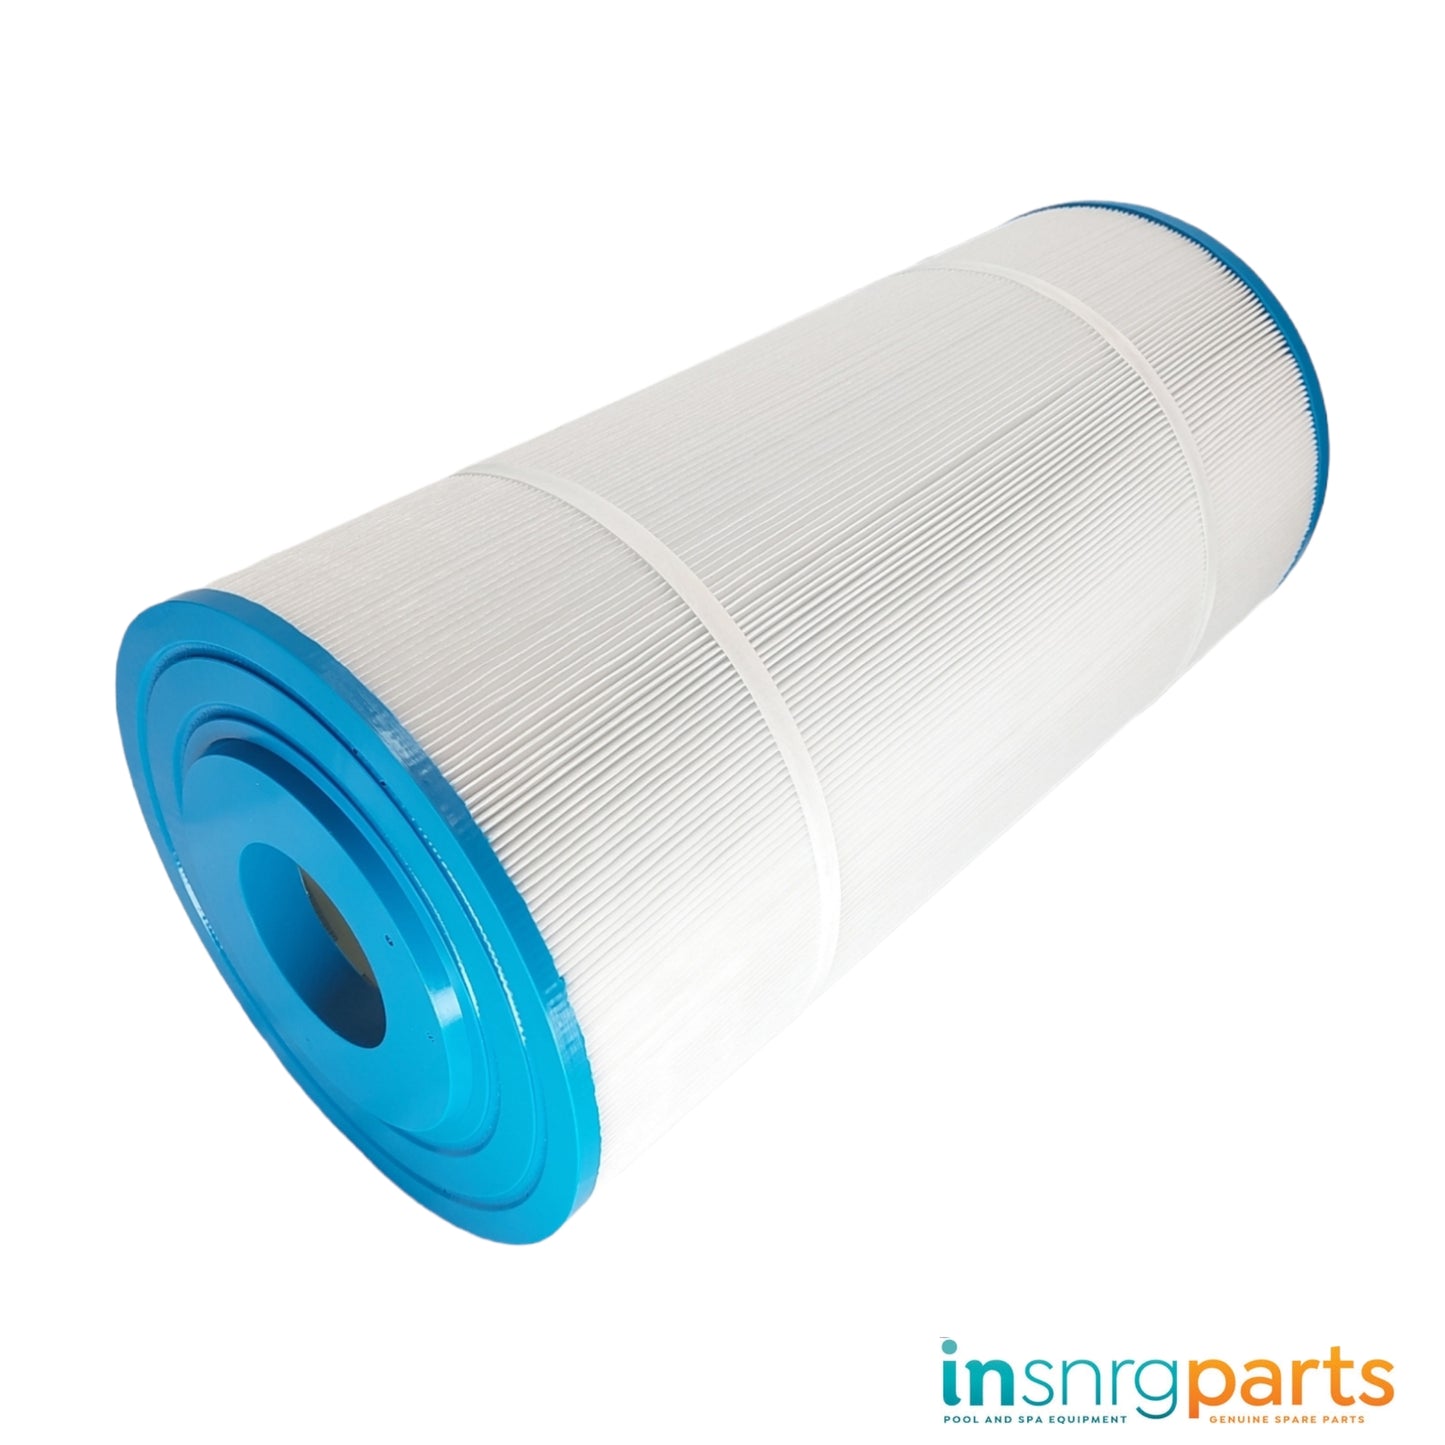 Replacement 150 Sq Ft Filter Cartridge/Element - Insnrg Ci150 Cartridge Filter [16129992]